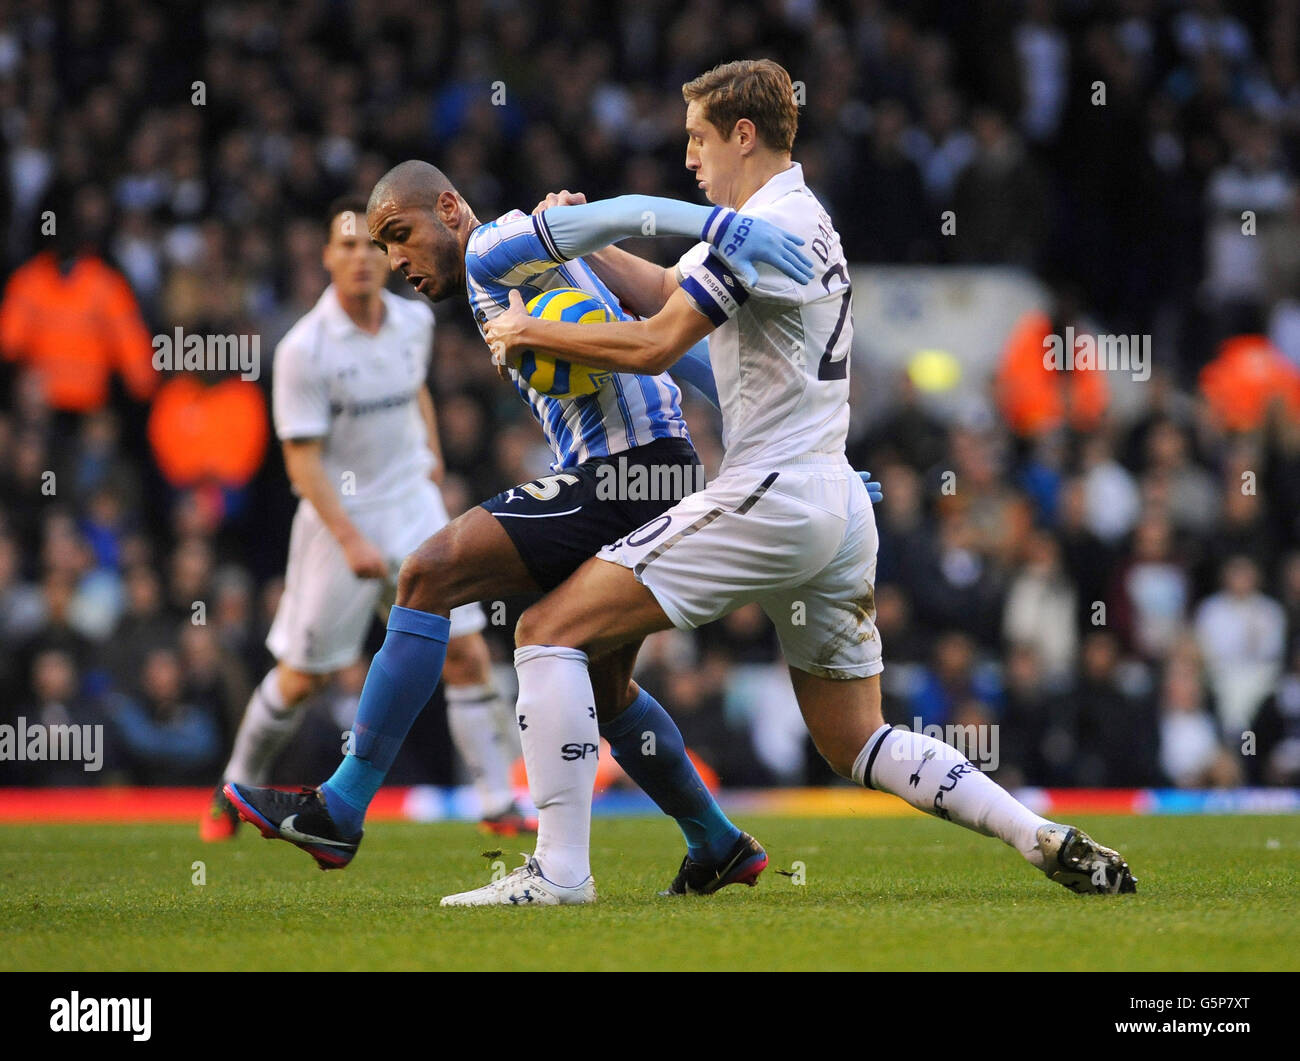 Coventry City's Leon Clarke (left) battles for the ball with Tottenham Hotspur's Michael Dawson during the FA Cup Third Round match at White Hart Lane, London. Stock Photo